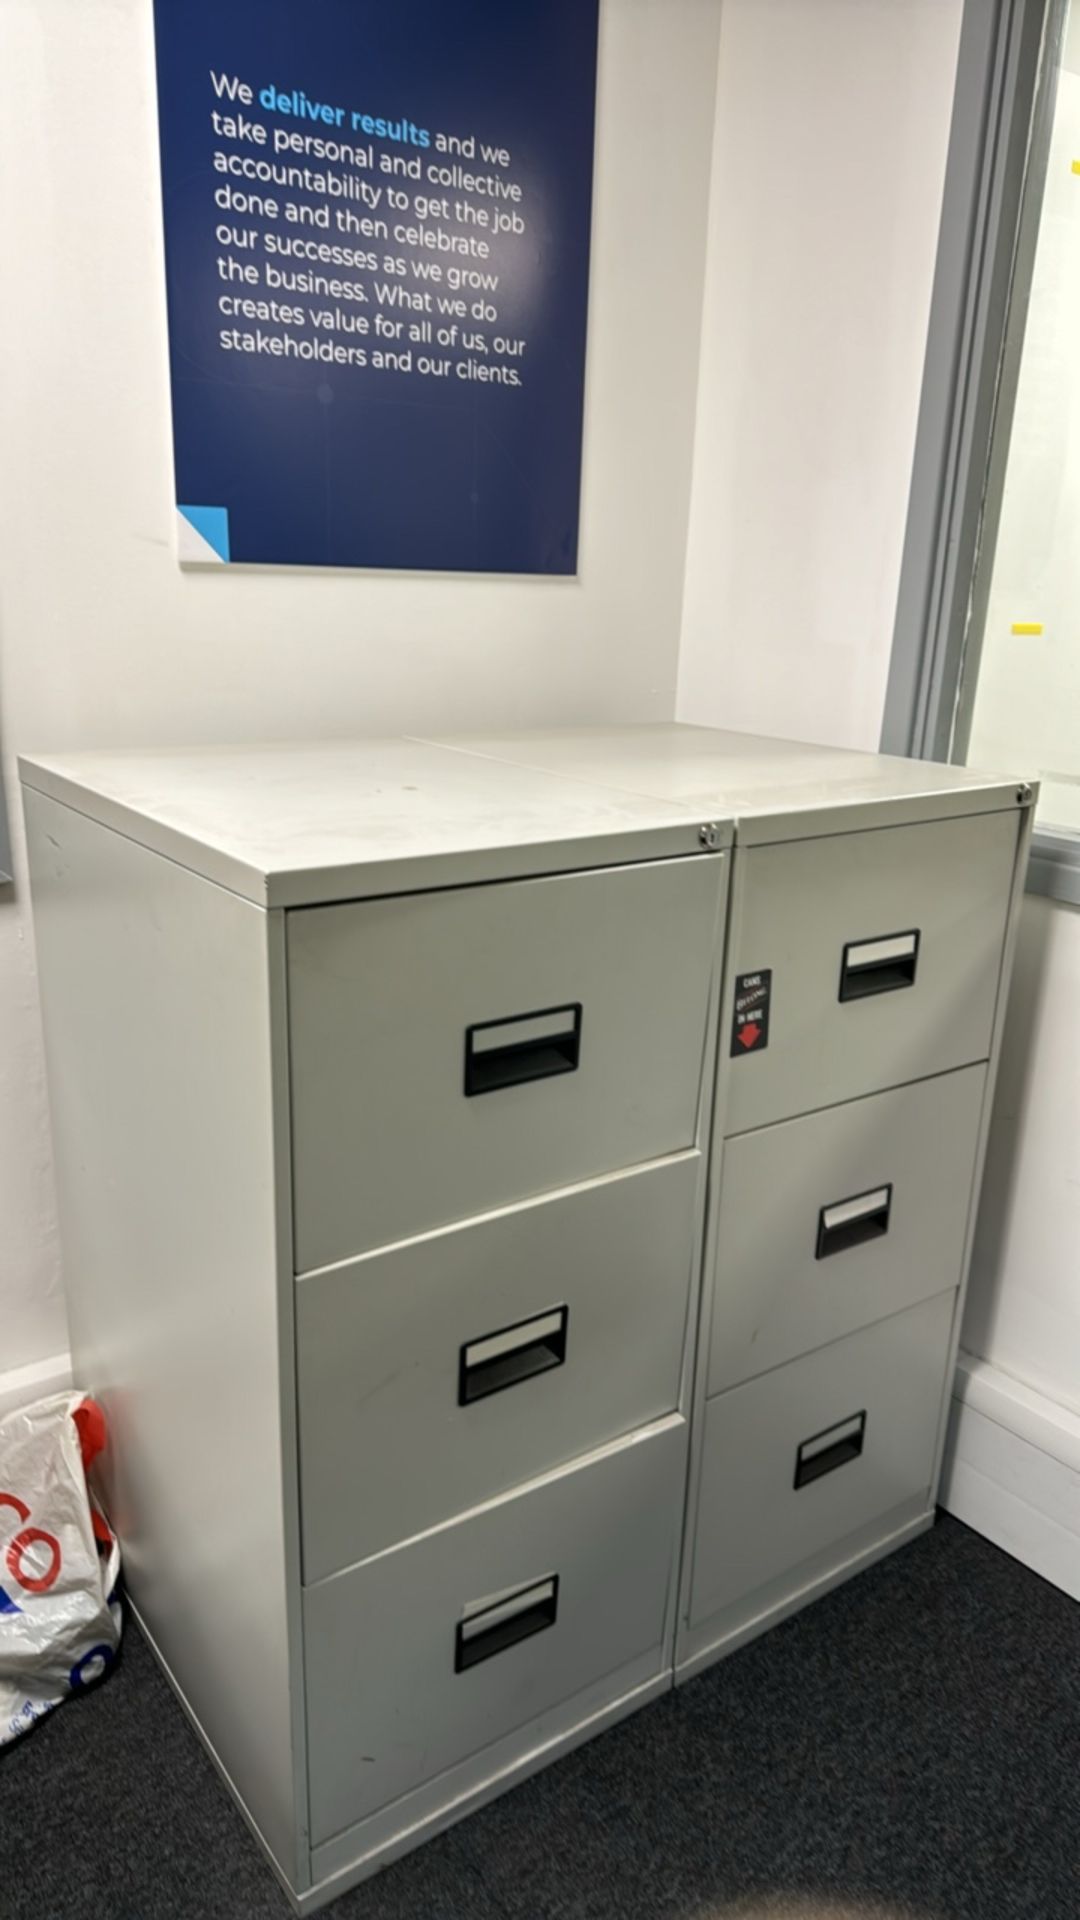 ref 401 - Metal Filing Cabinets x2 - Image 4 of 4